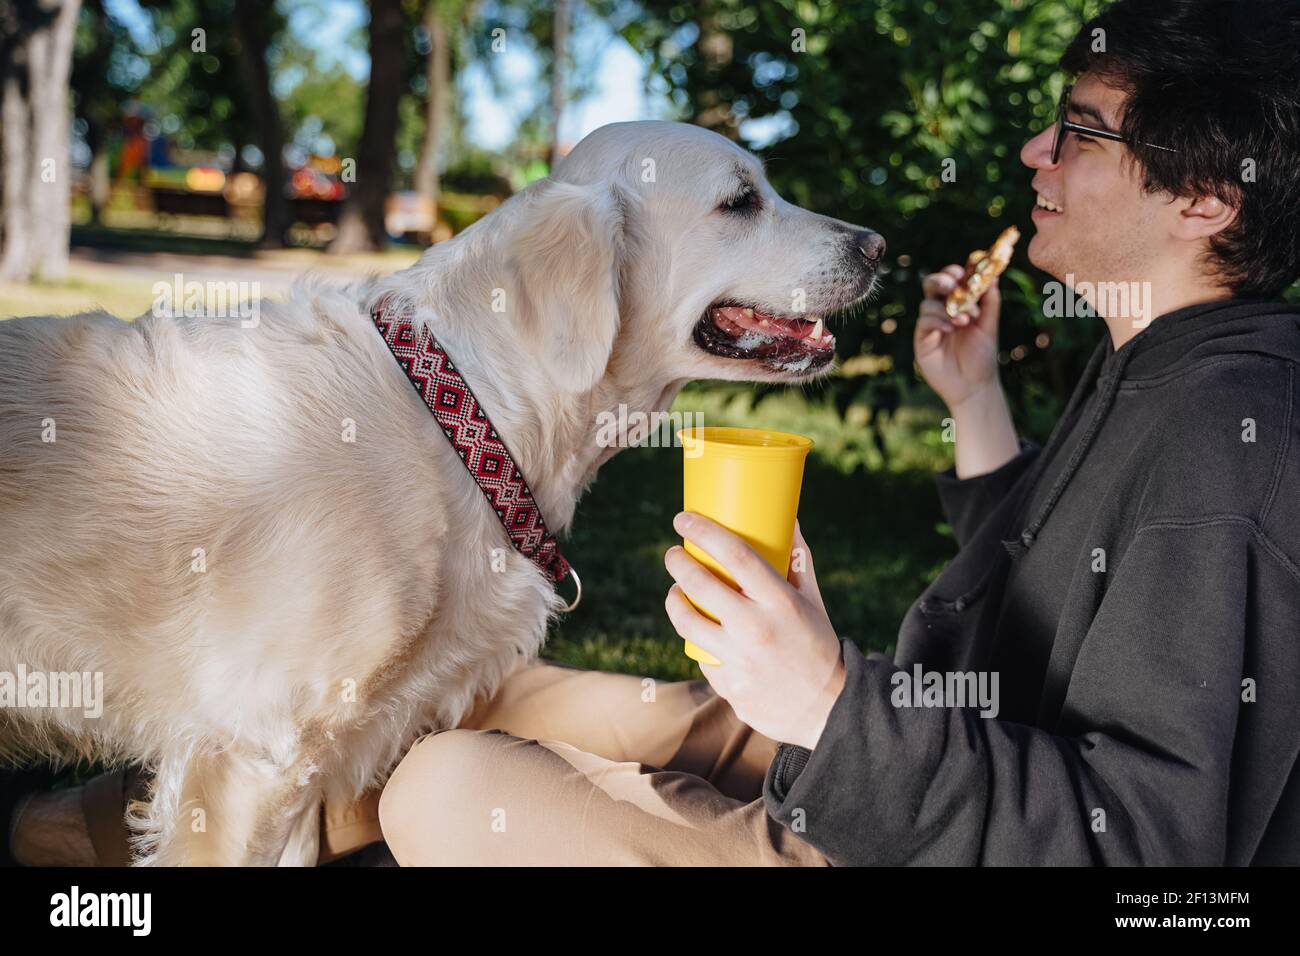 Man feeds his dog snacks for obedience in park Stock Photo